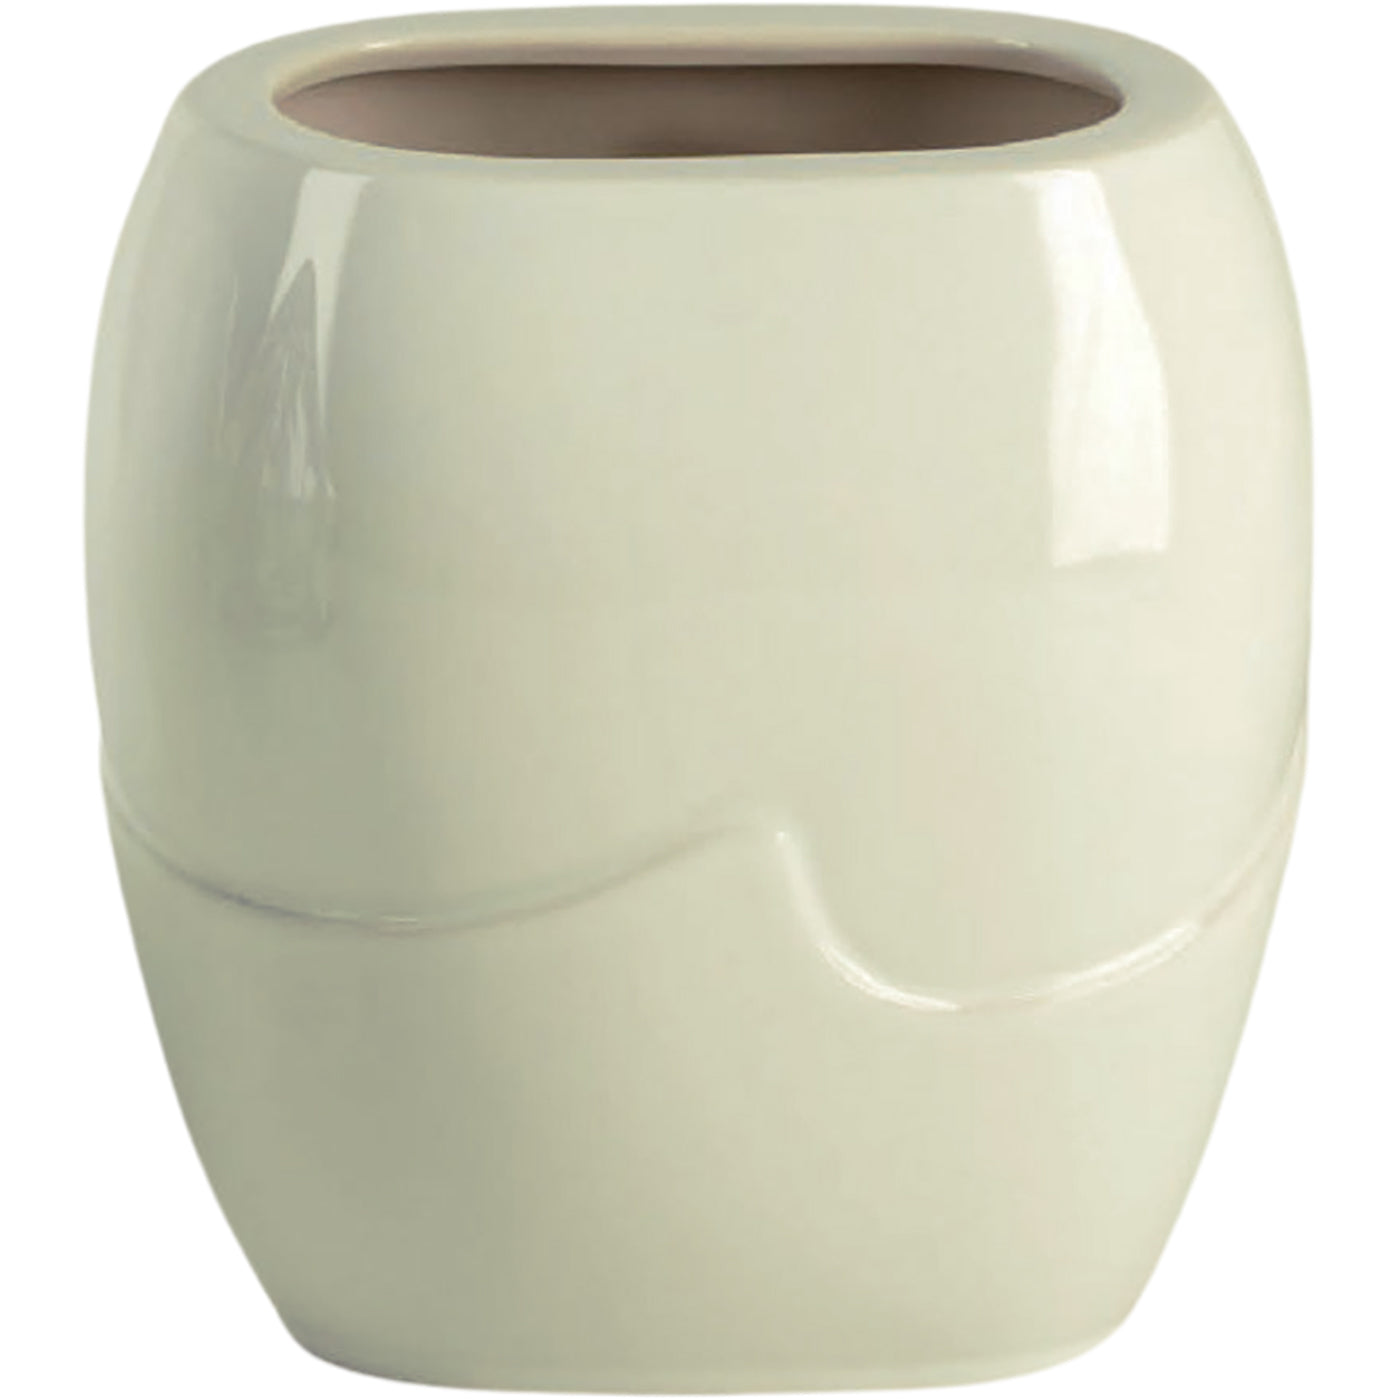 Rectangular grave vase Onda ivory 19x17cm - 7.5x6.7in In ivory porcelain, wall attached ON166P/A